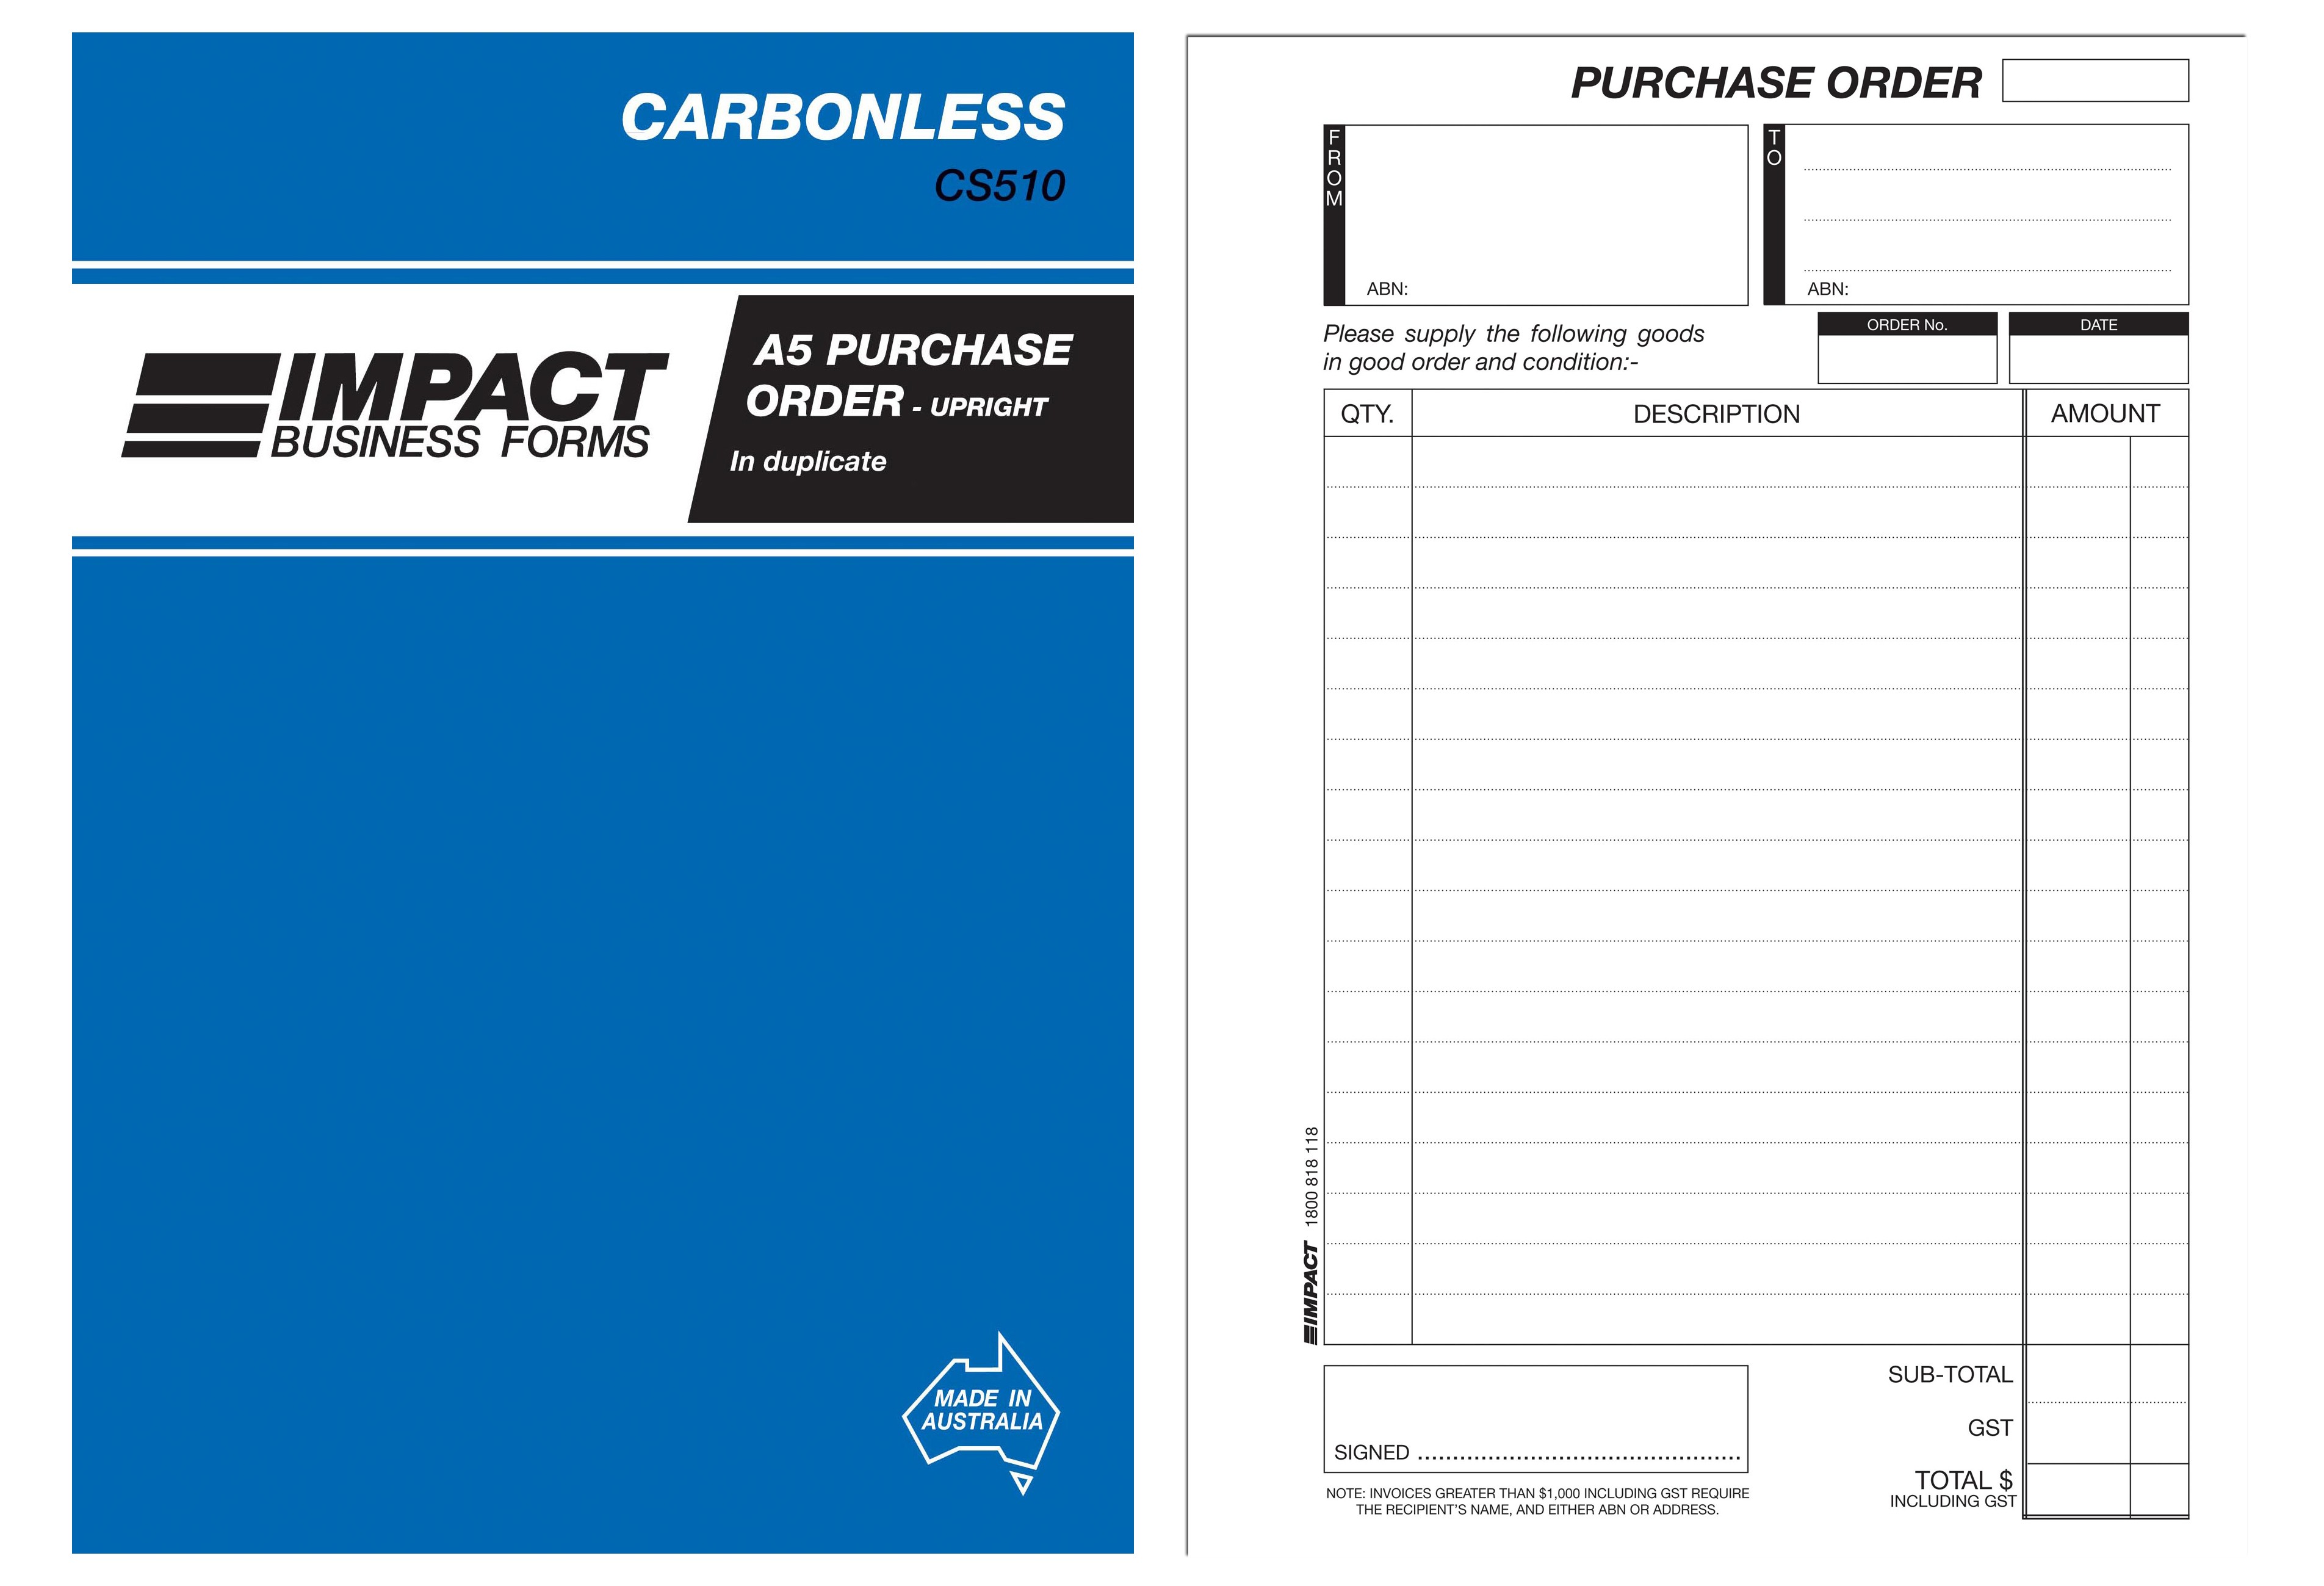 IMPACT CARBONLESS PURCHASE ORDER BOOK UPRIGHT A5 DUP. CS-510 (price excludes gst)